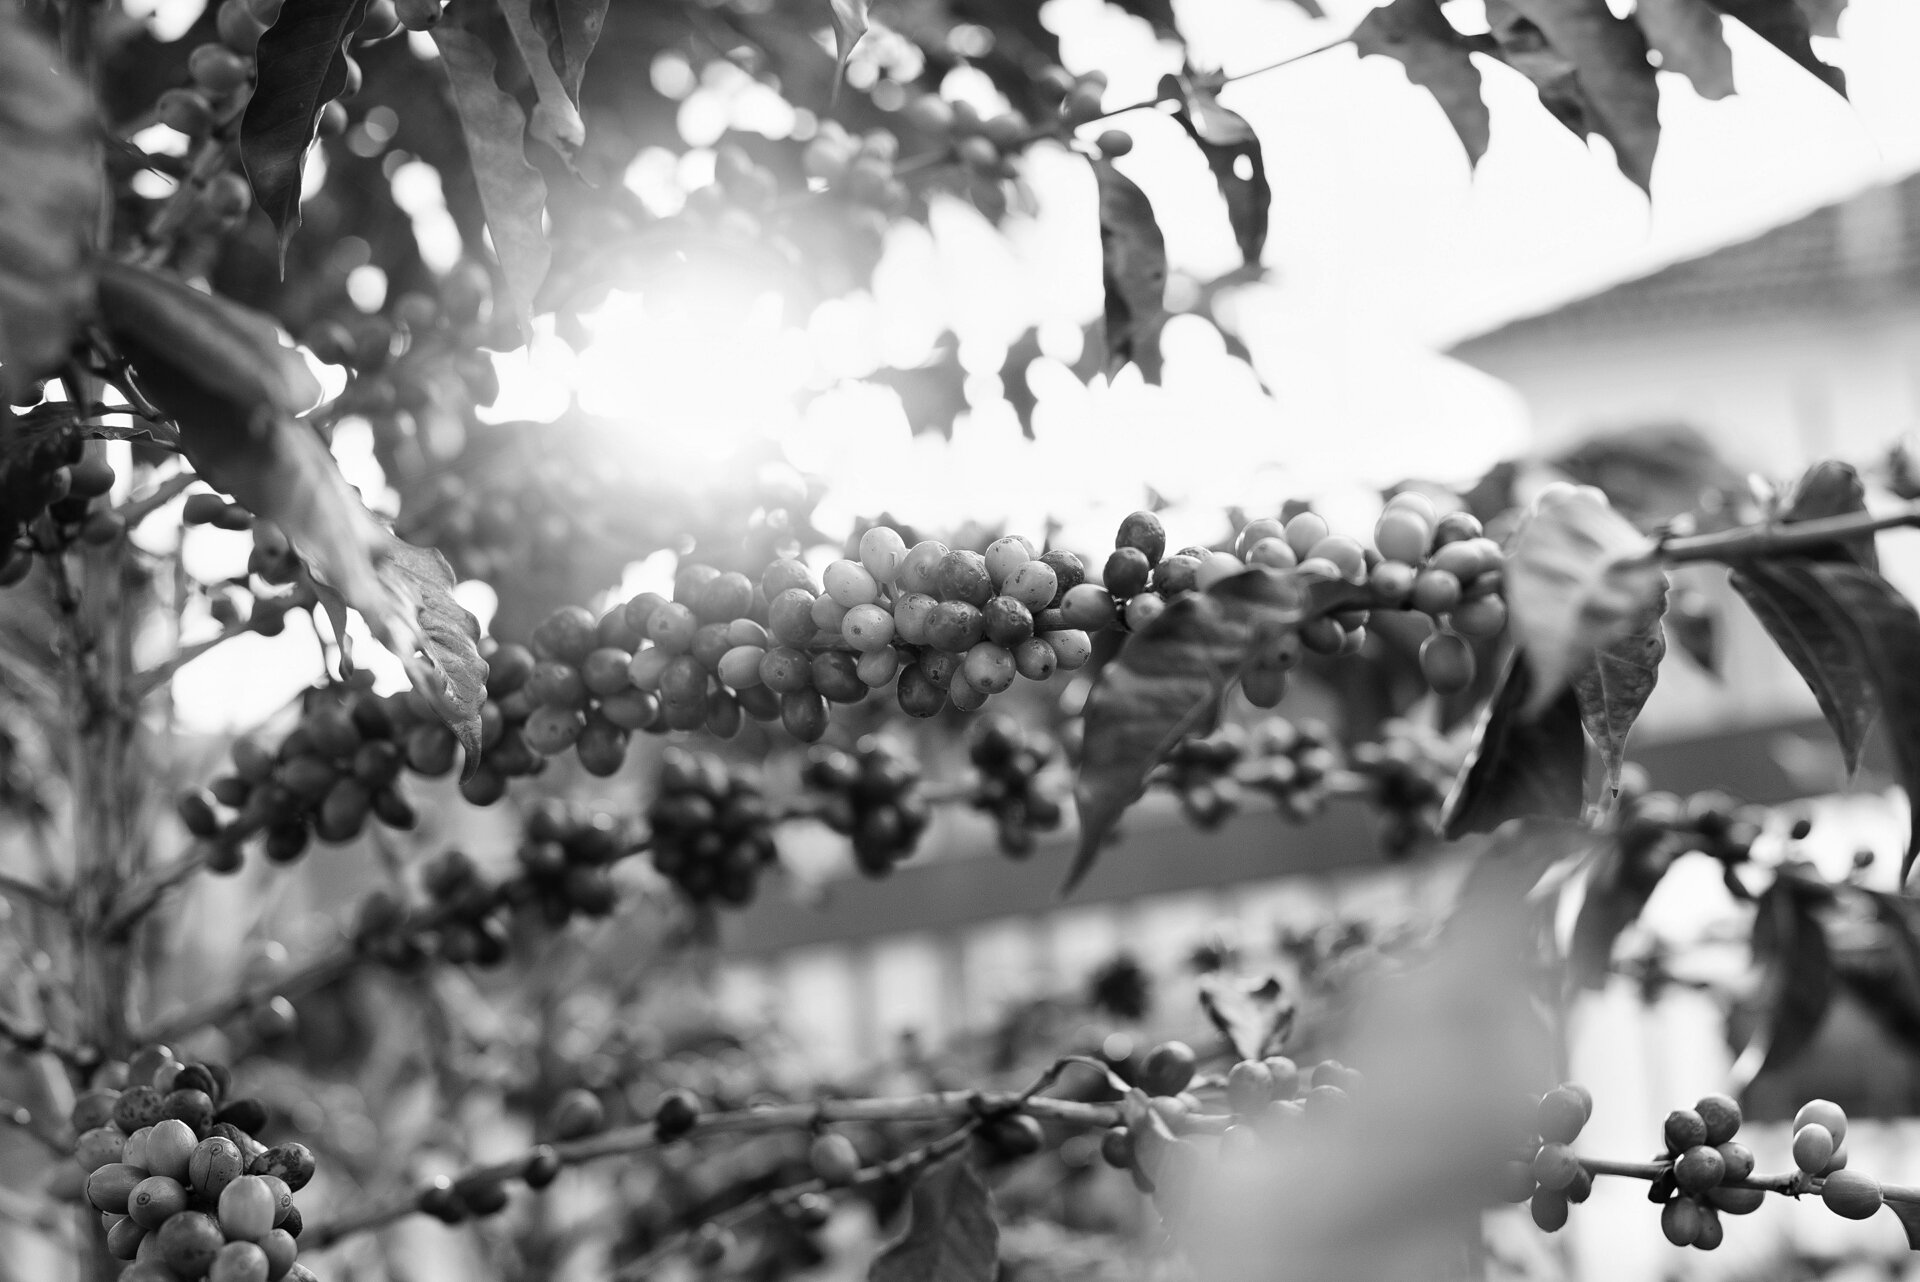 Coffee cherries on a branch with sun coming through behind